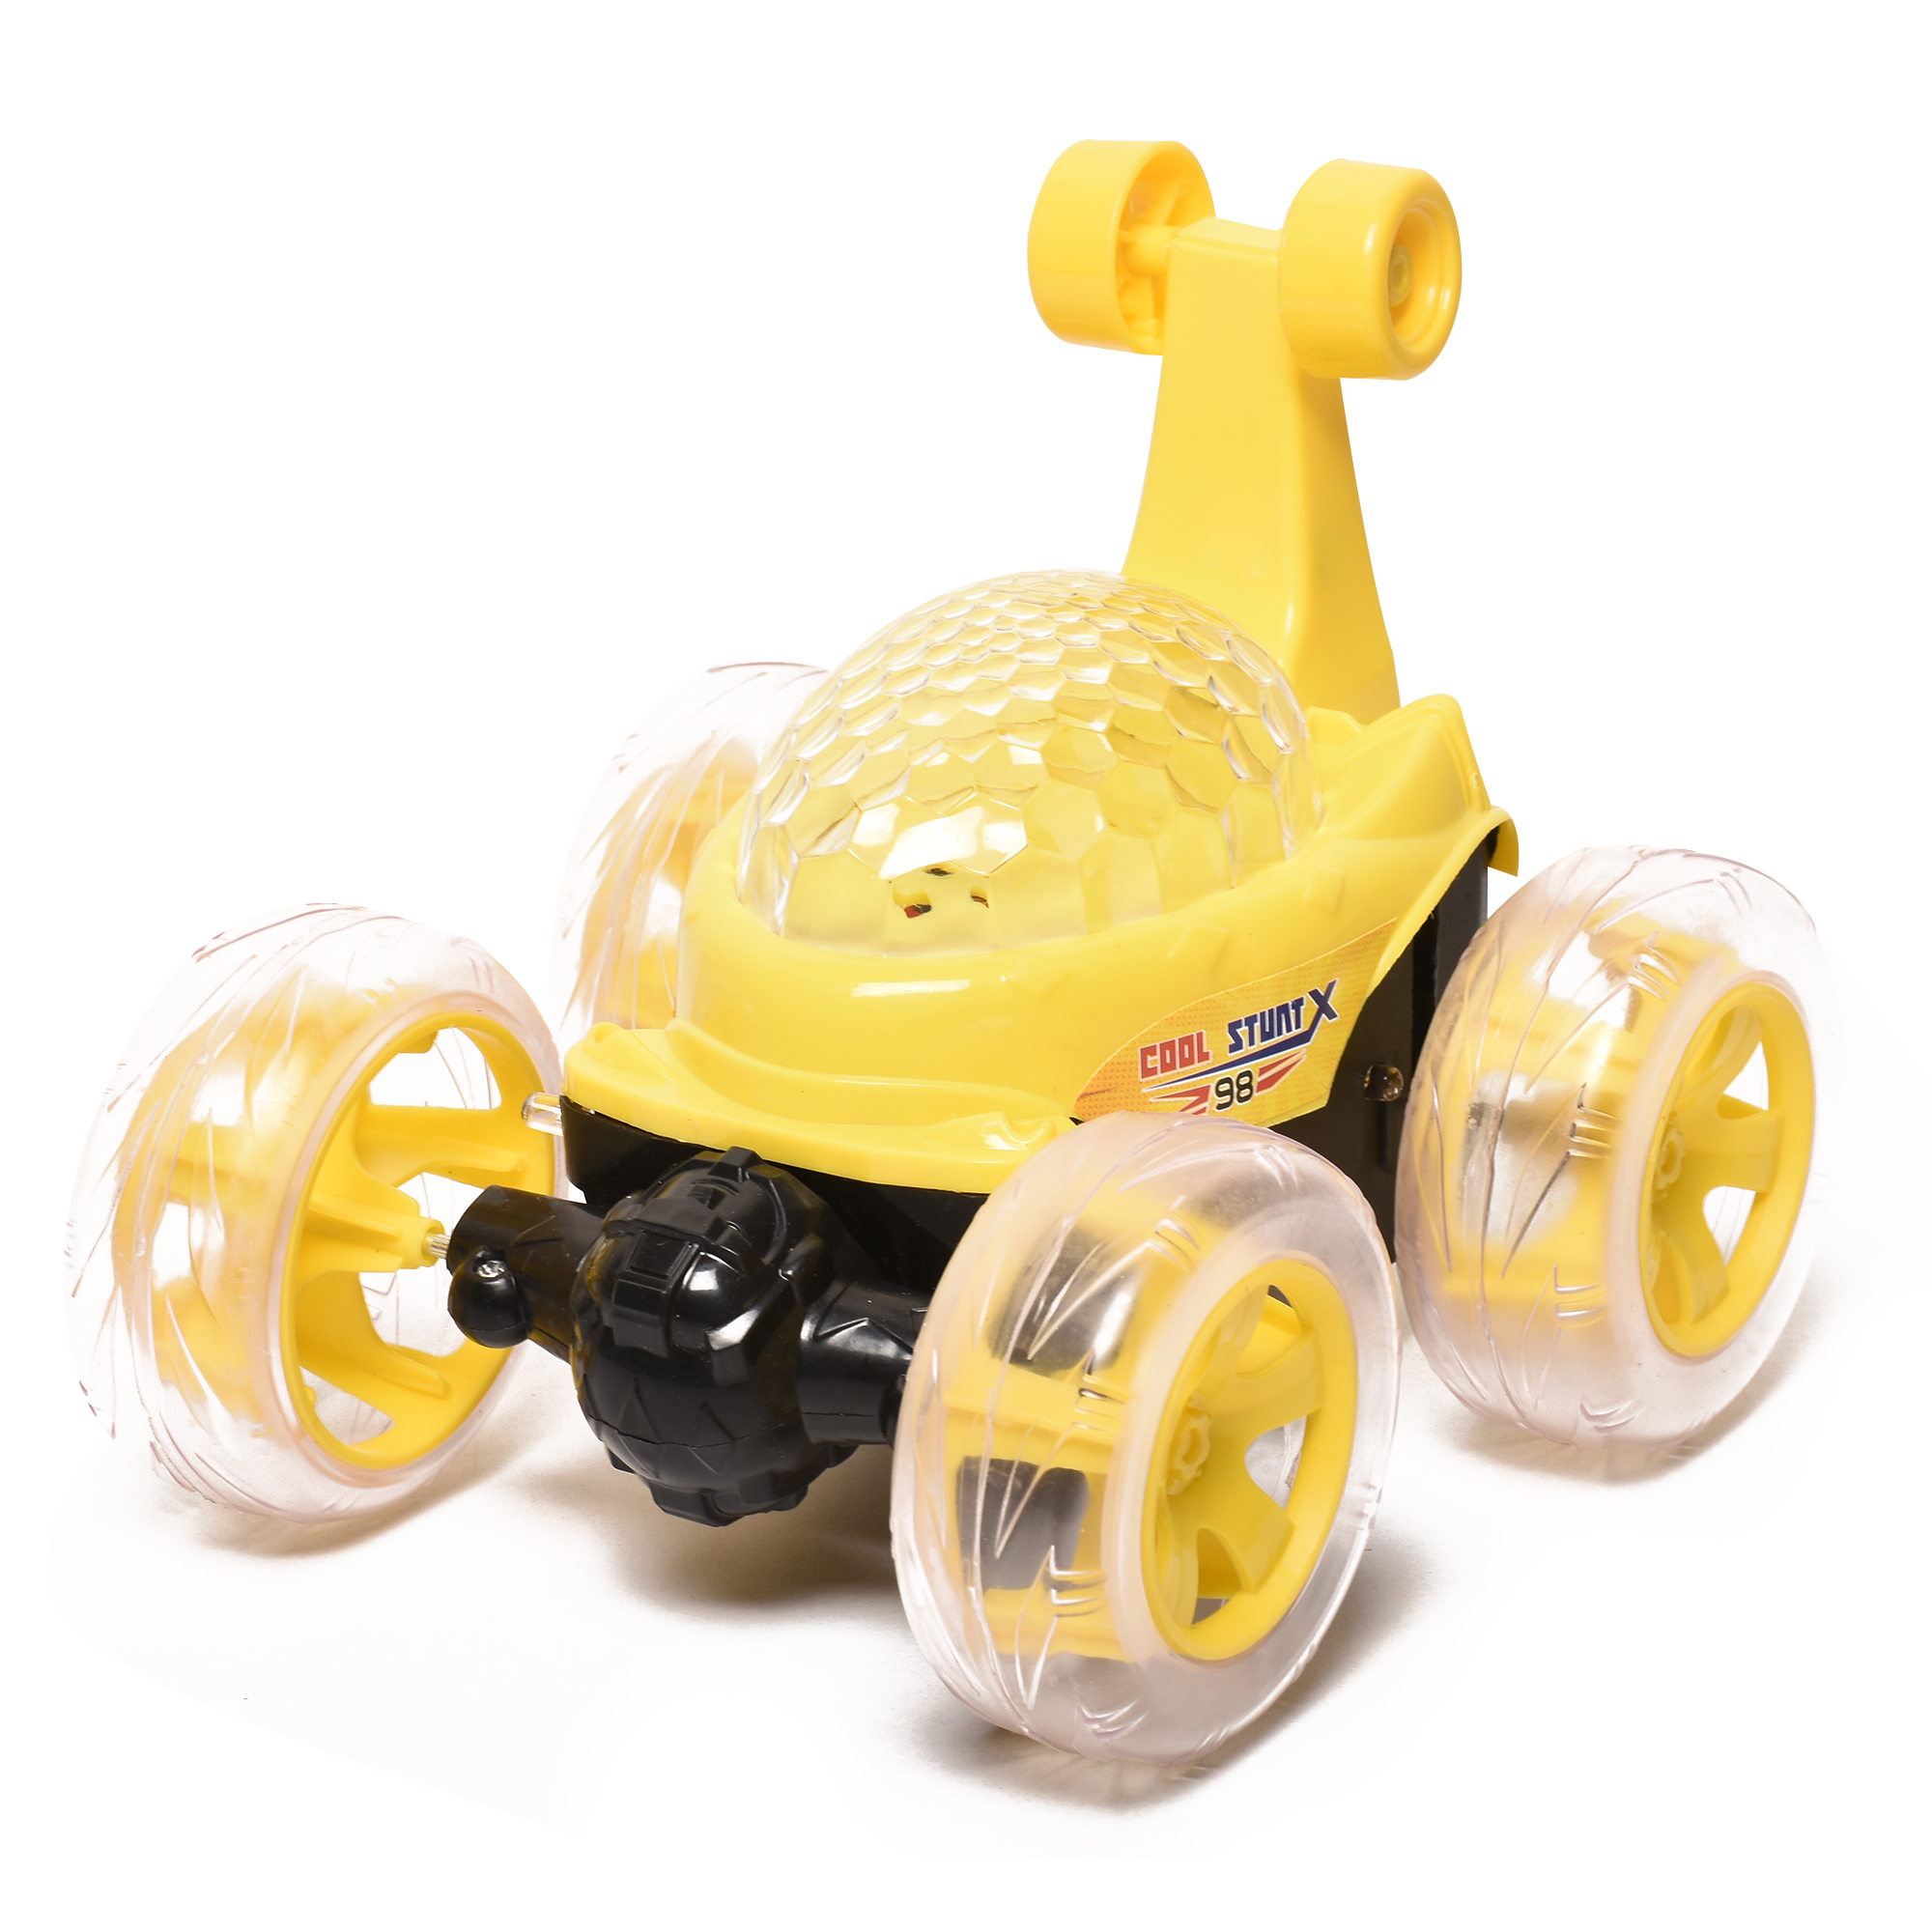 Rechargeable Remote Control Stunt Tipper RC Car Acrobatic 360 Degree Spiral Spin Twisting Stunt Car with Colorful Lights & Music Toys for Kids 5+Years (Yellow)